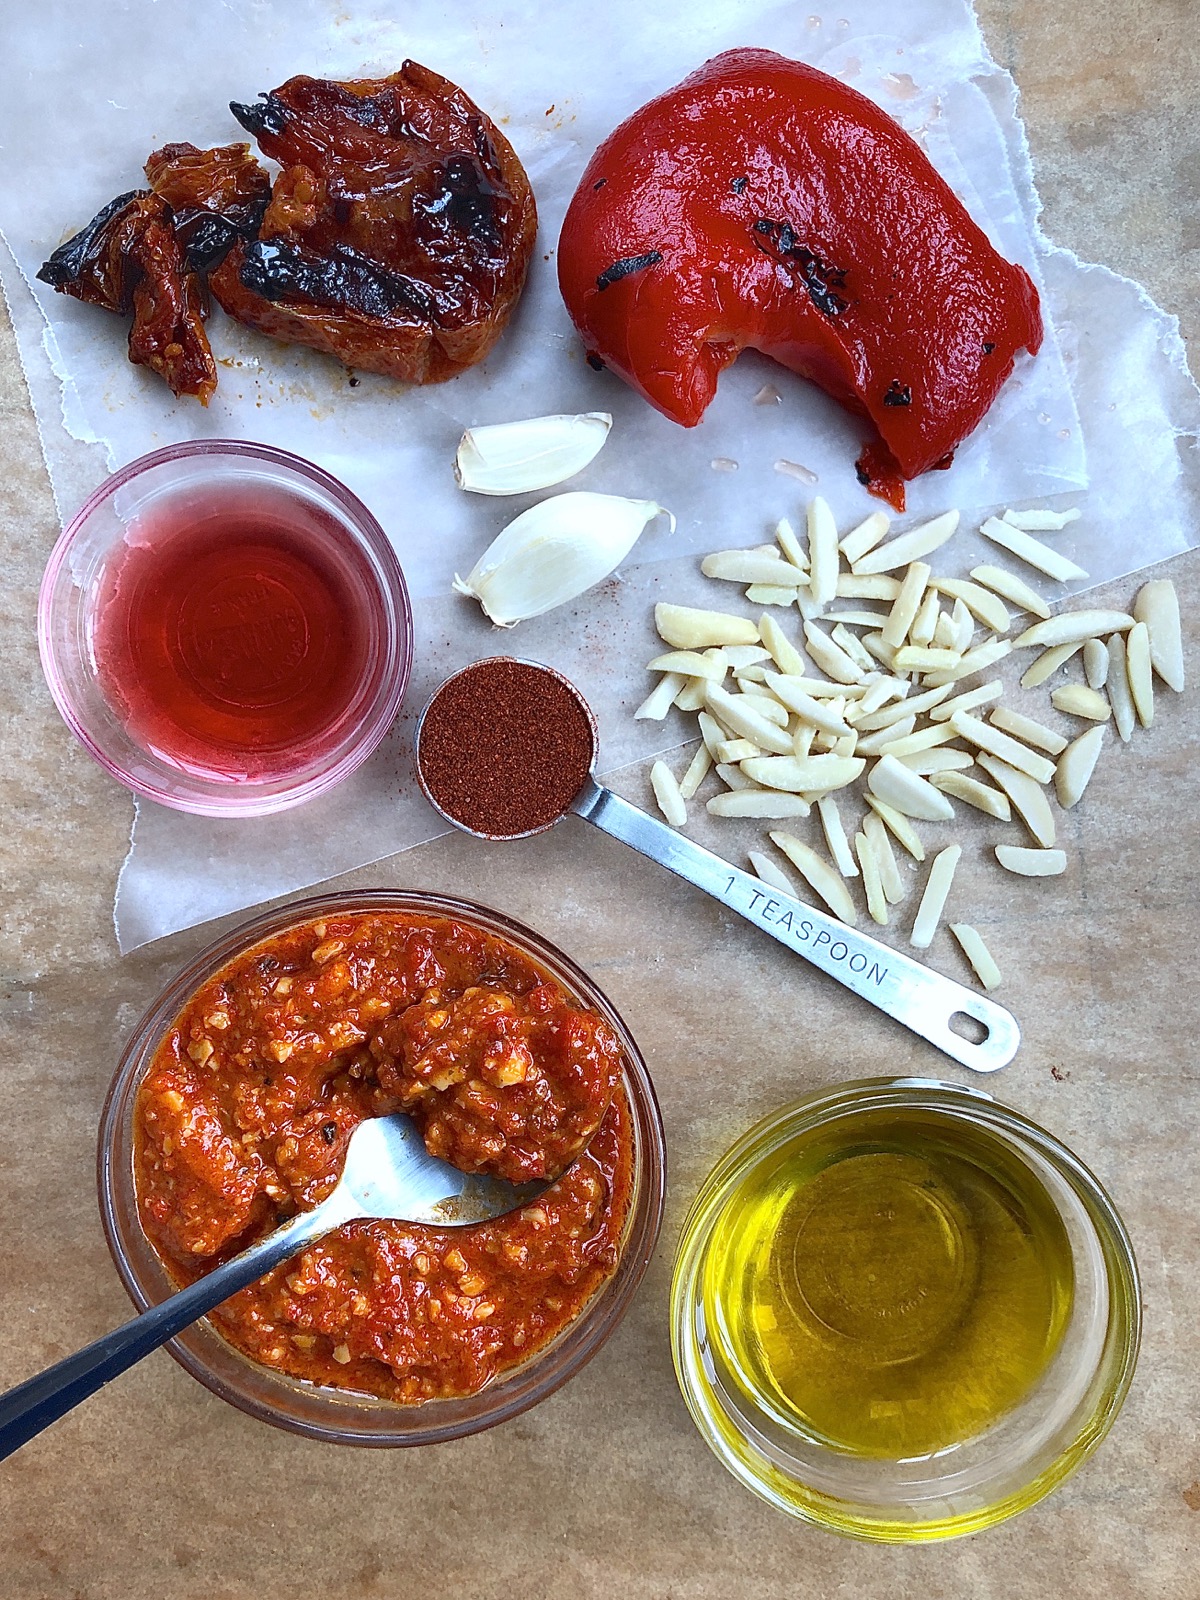 Ingredients for romesco sauce, including roasted red bell pepper, oven-roasted tomatoes, red wine vinegar, garlic cloves, slivered almonds, smoked paprika, and olive oil